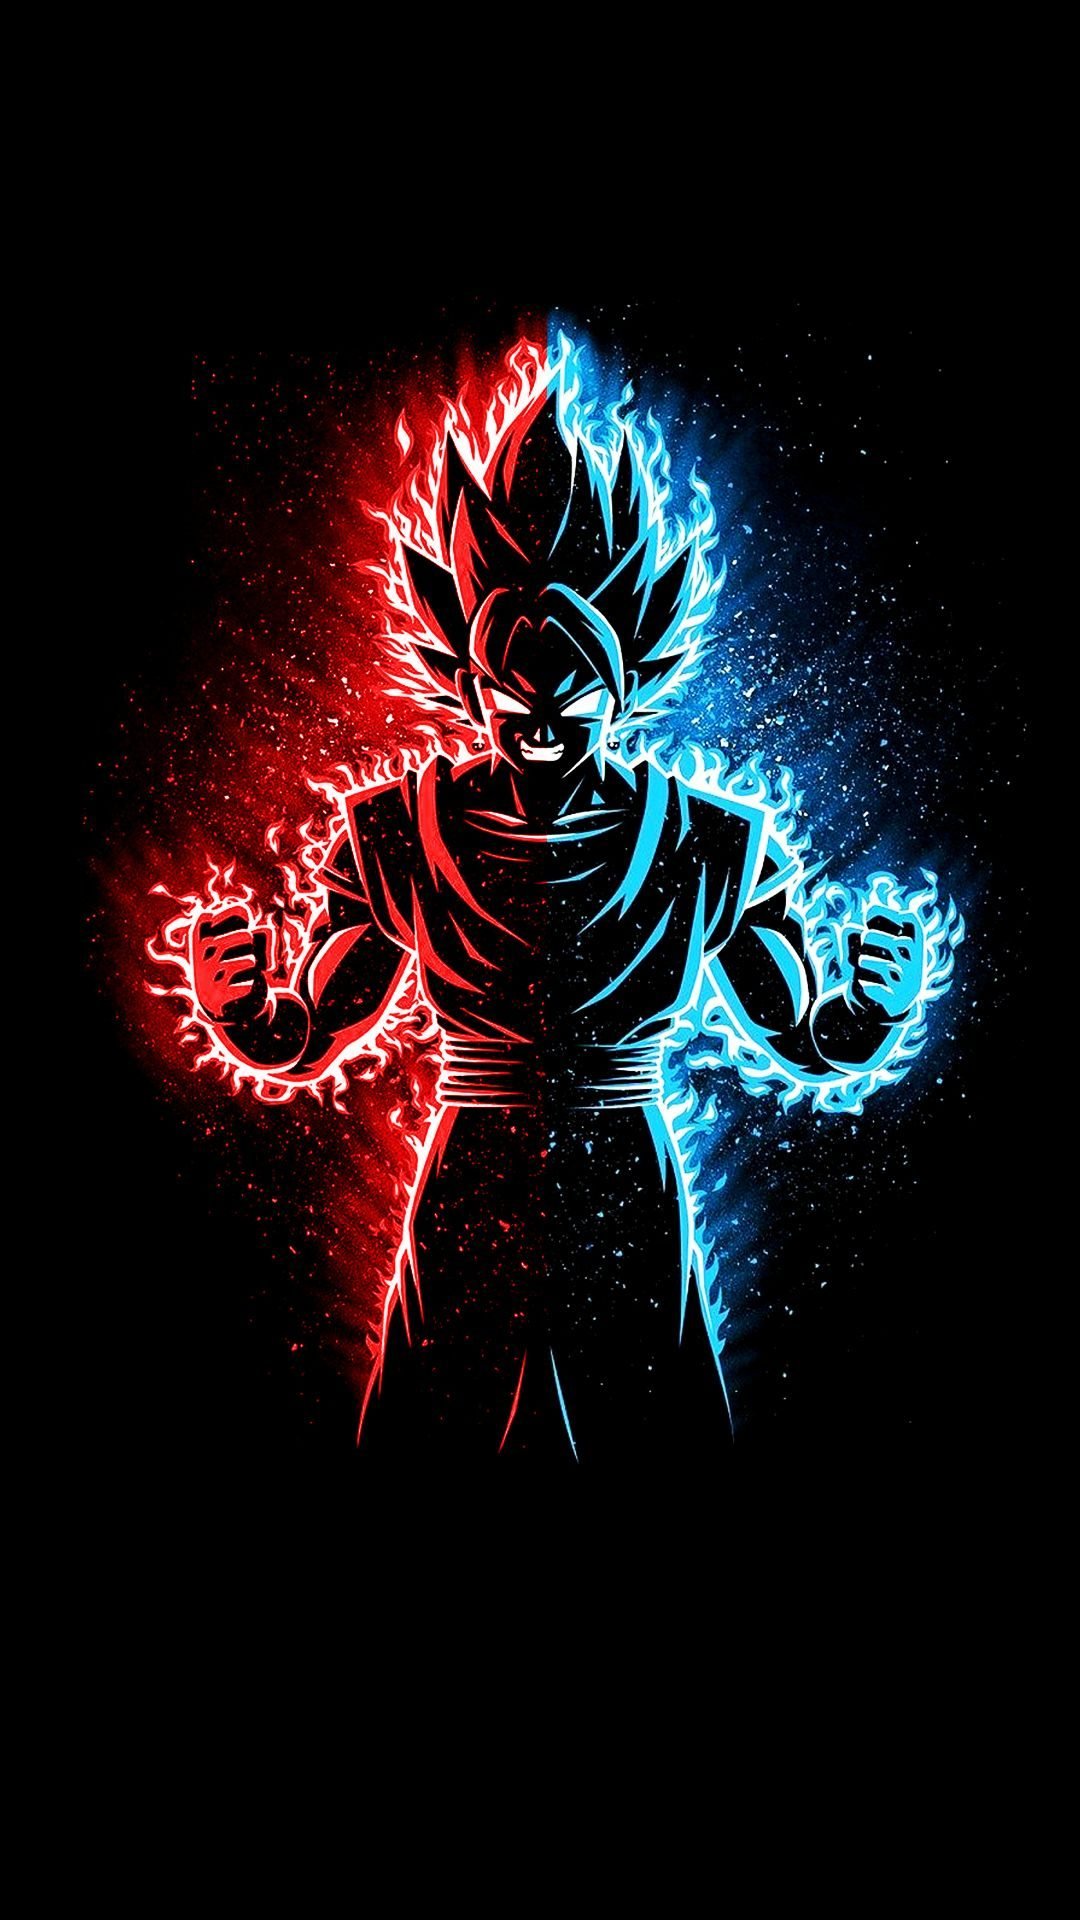 Dragon Ball Z Goku Ultra Instinct Fire Wallpaper HD Anime 4K Wallpapers  Images and Background  Wallpapers Den